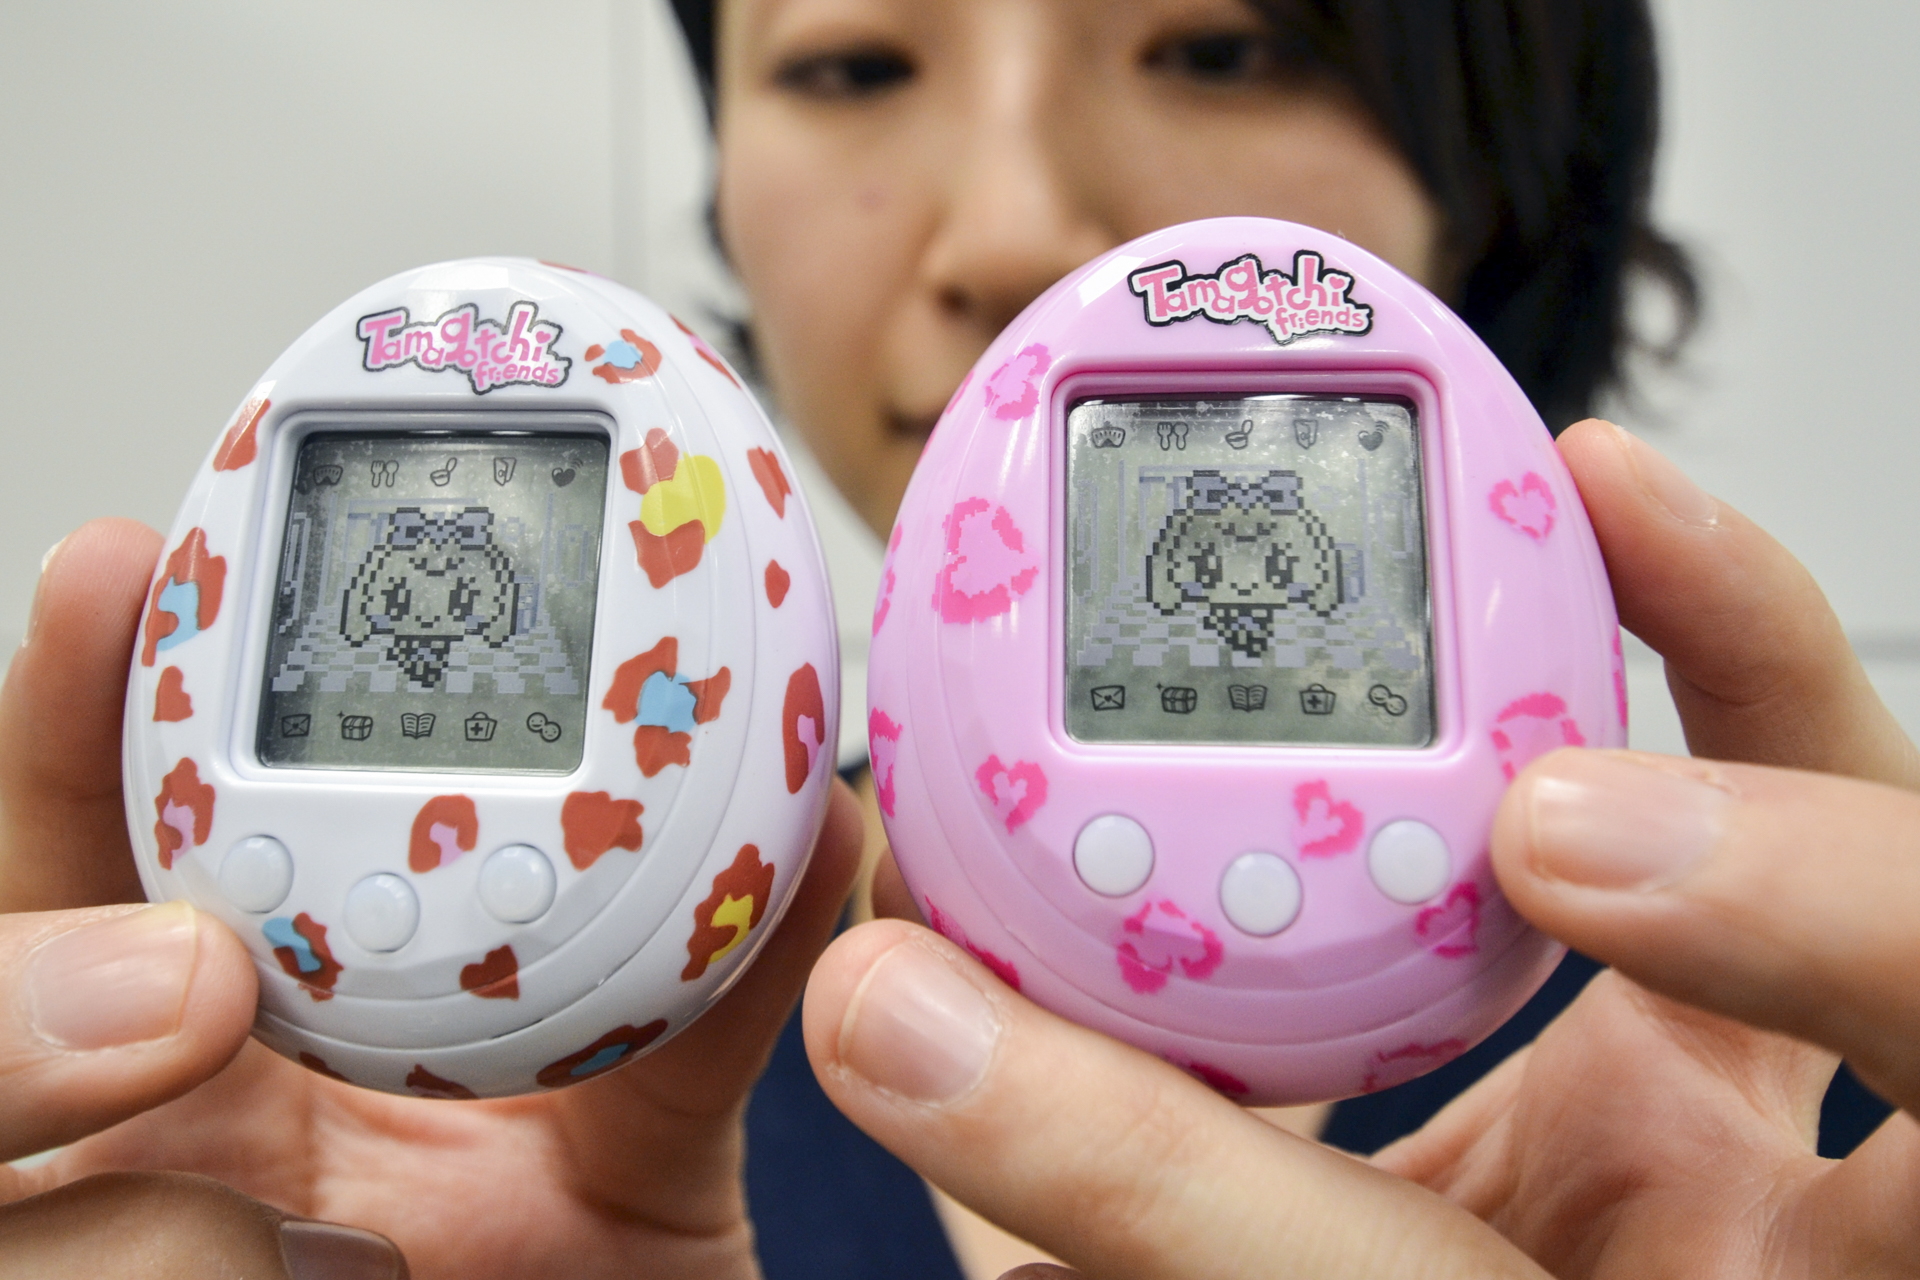 Tamagotchi turns 25 with a nostalgia-fuelled wearable pet